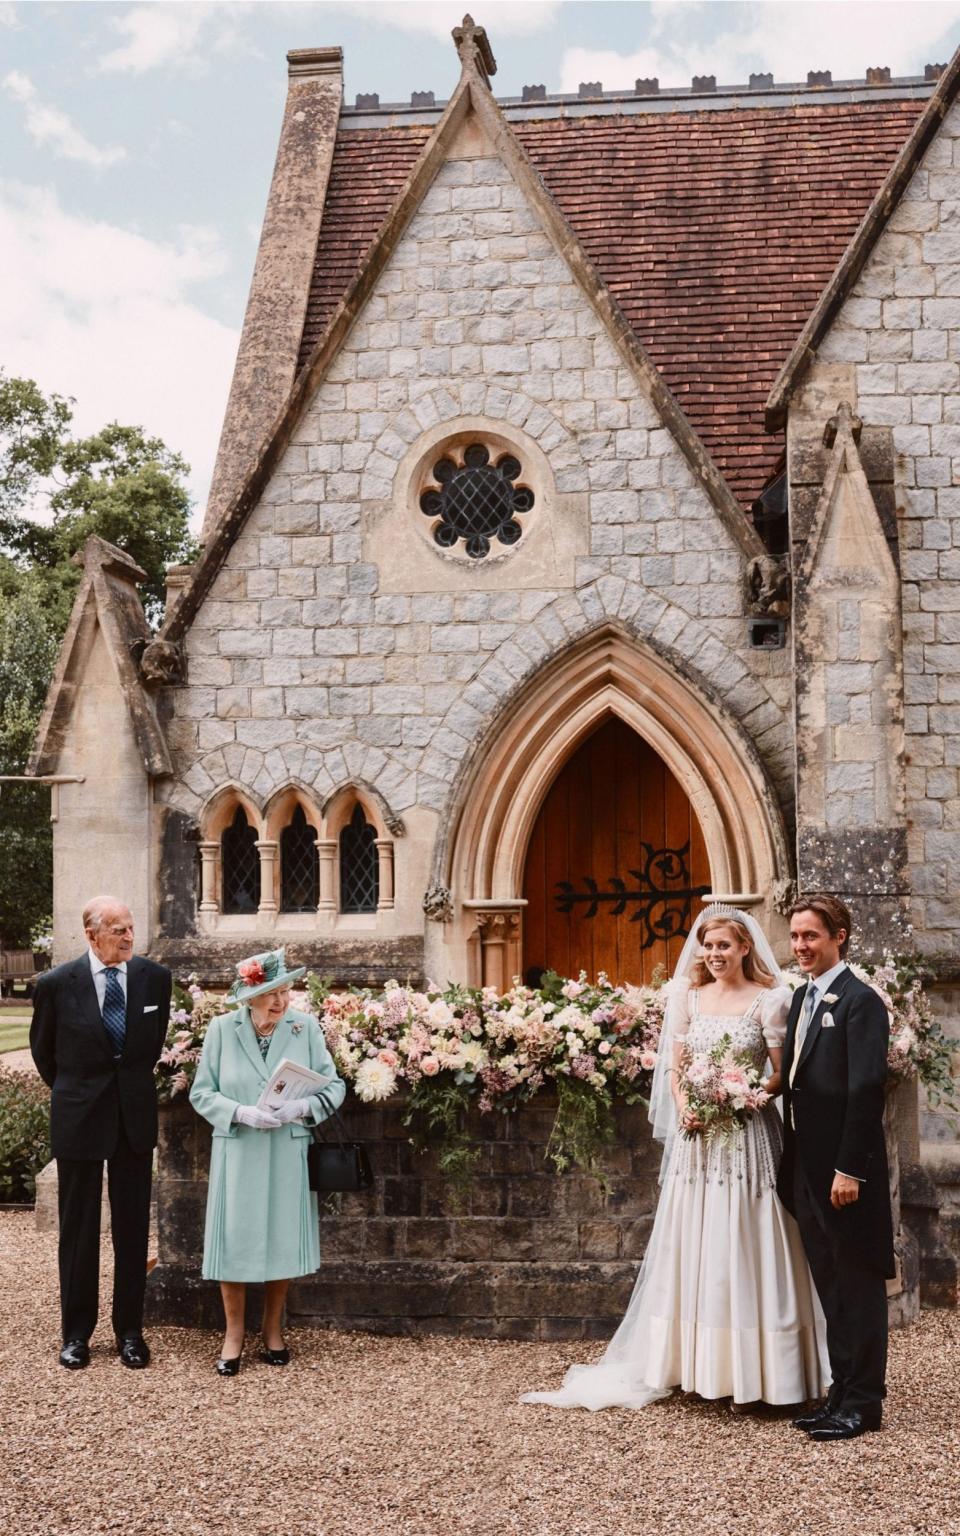 Queen Elizabeth and Prince Philip standing along with Princess Beatrice and Edoardo Mapelli Mozzi outside The Royal Chapel of All Saints at Royal Lodge, Windsor, after their wedding - Benjamin Wheeler